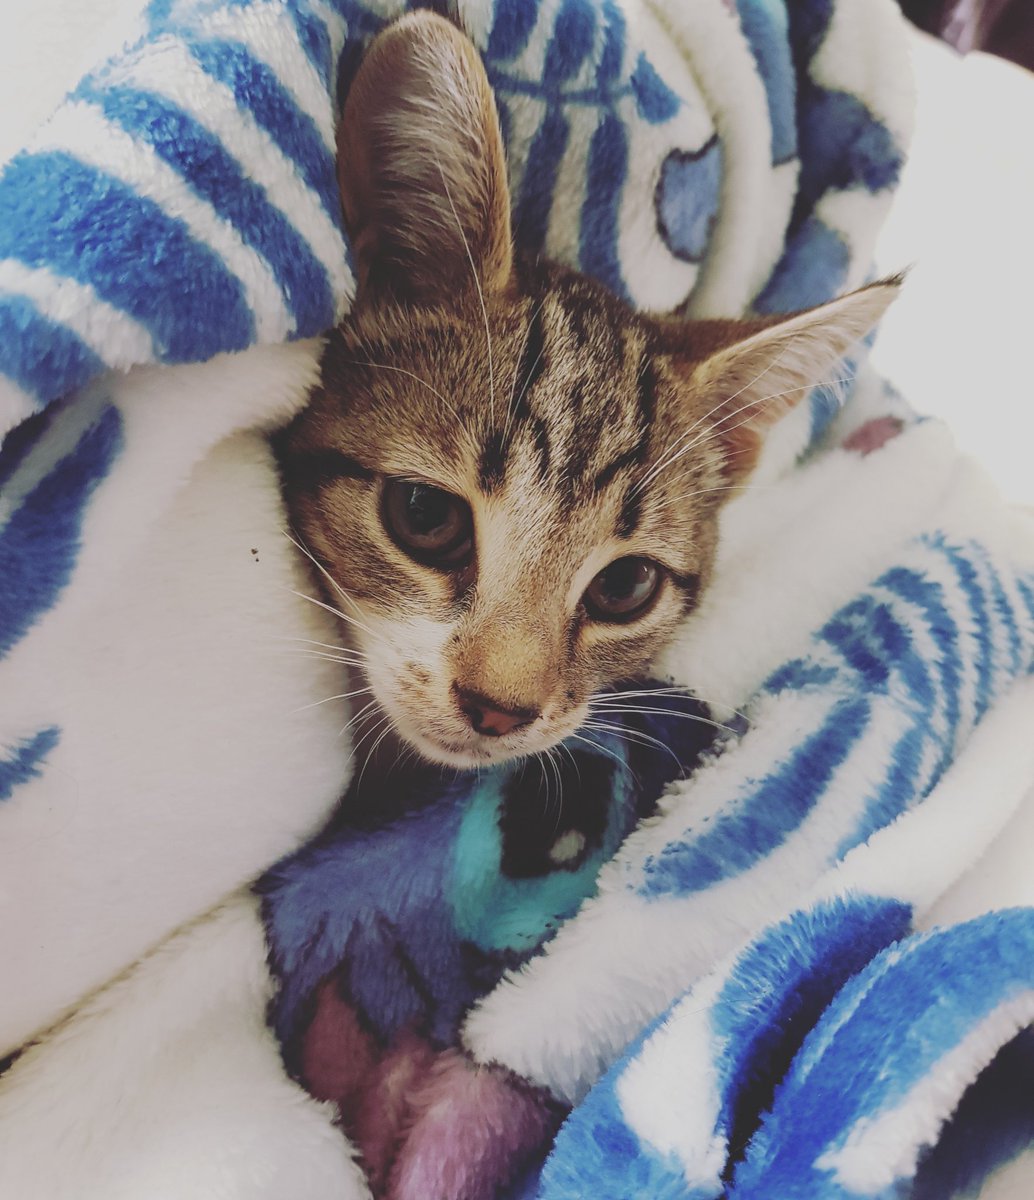 Dont really post much on here but I wanna share pictures of my kitties! Look how adorable little eevee is! this was a couple days after we got her #Kitten #tabbykitten #CatsOfTwitter #cats